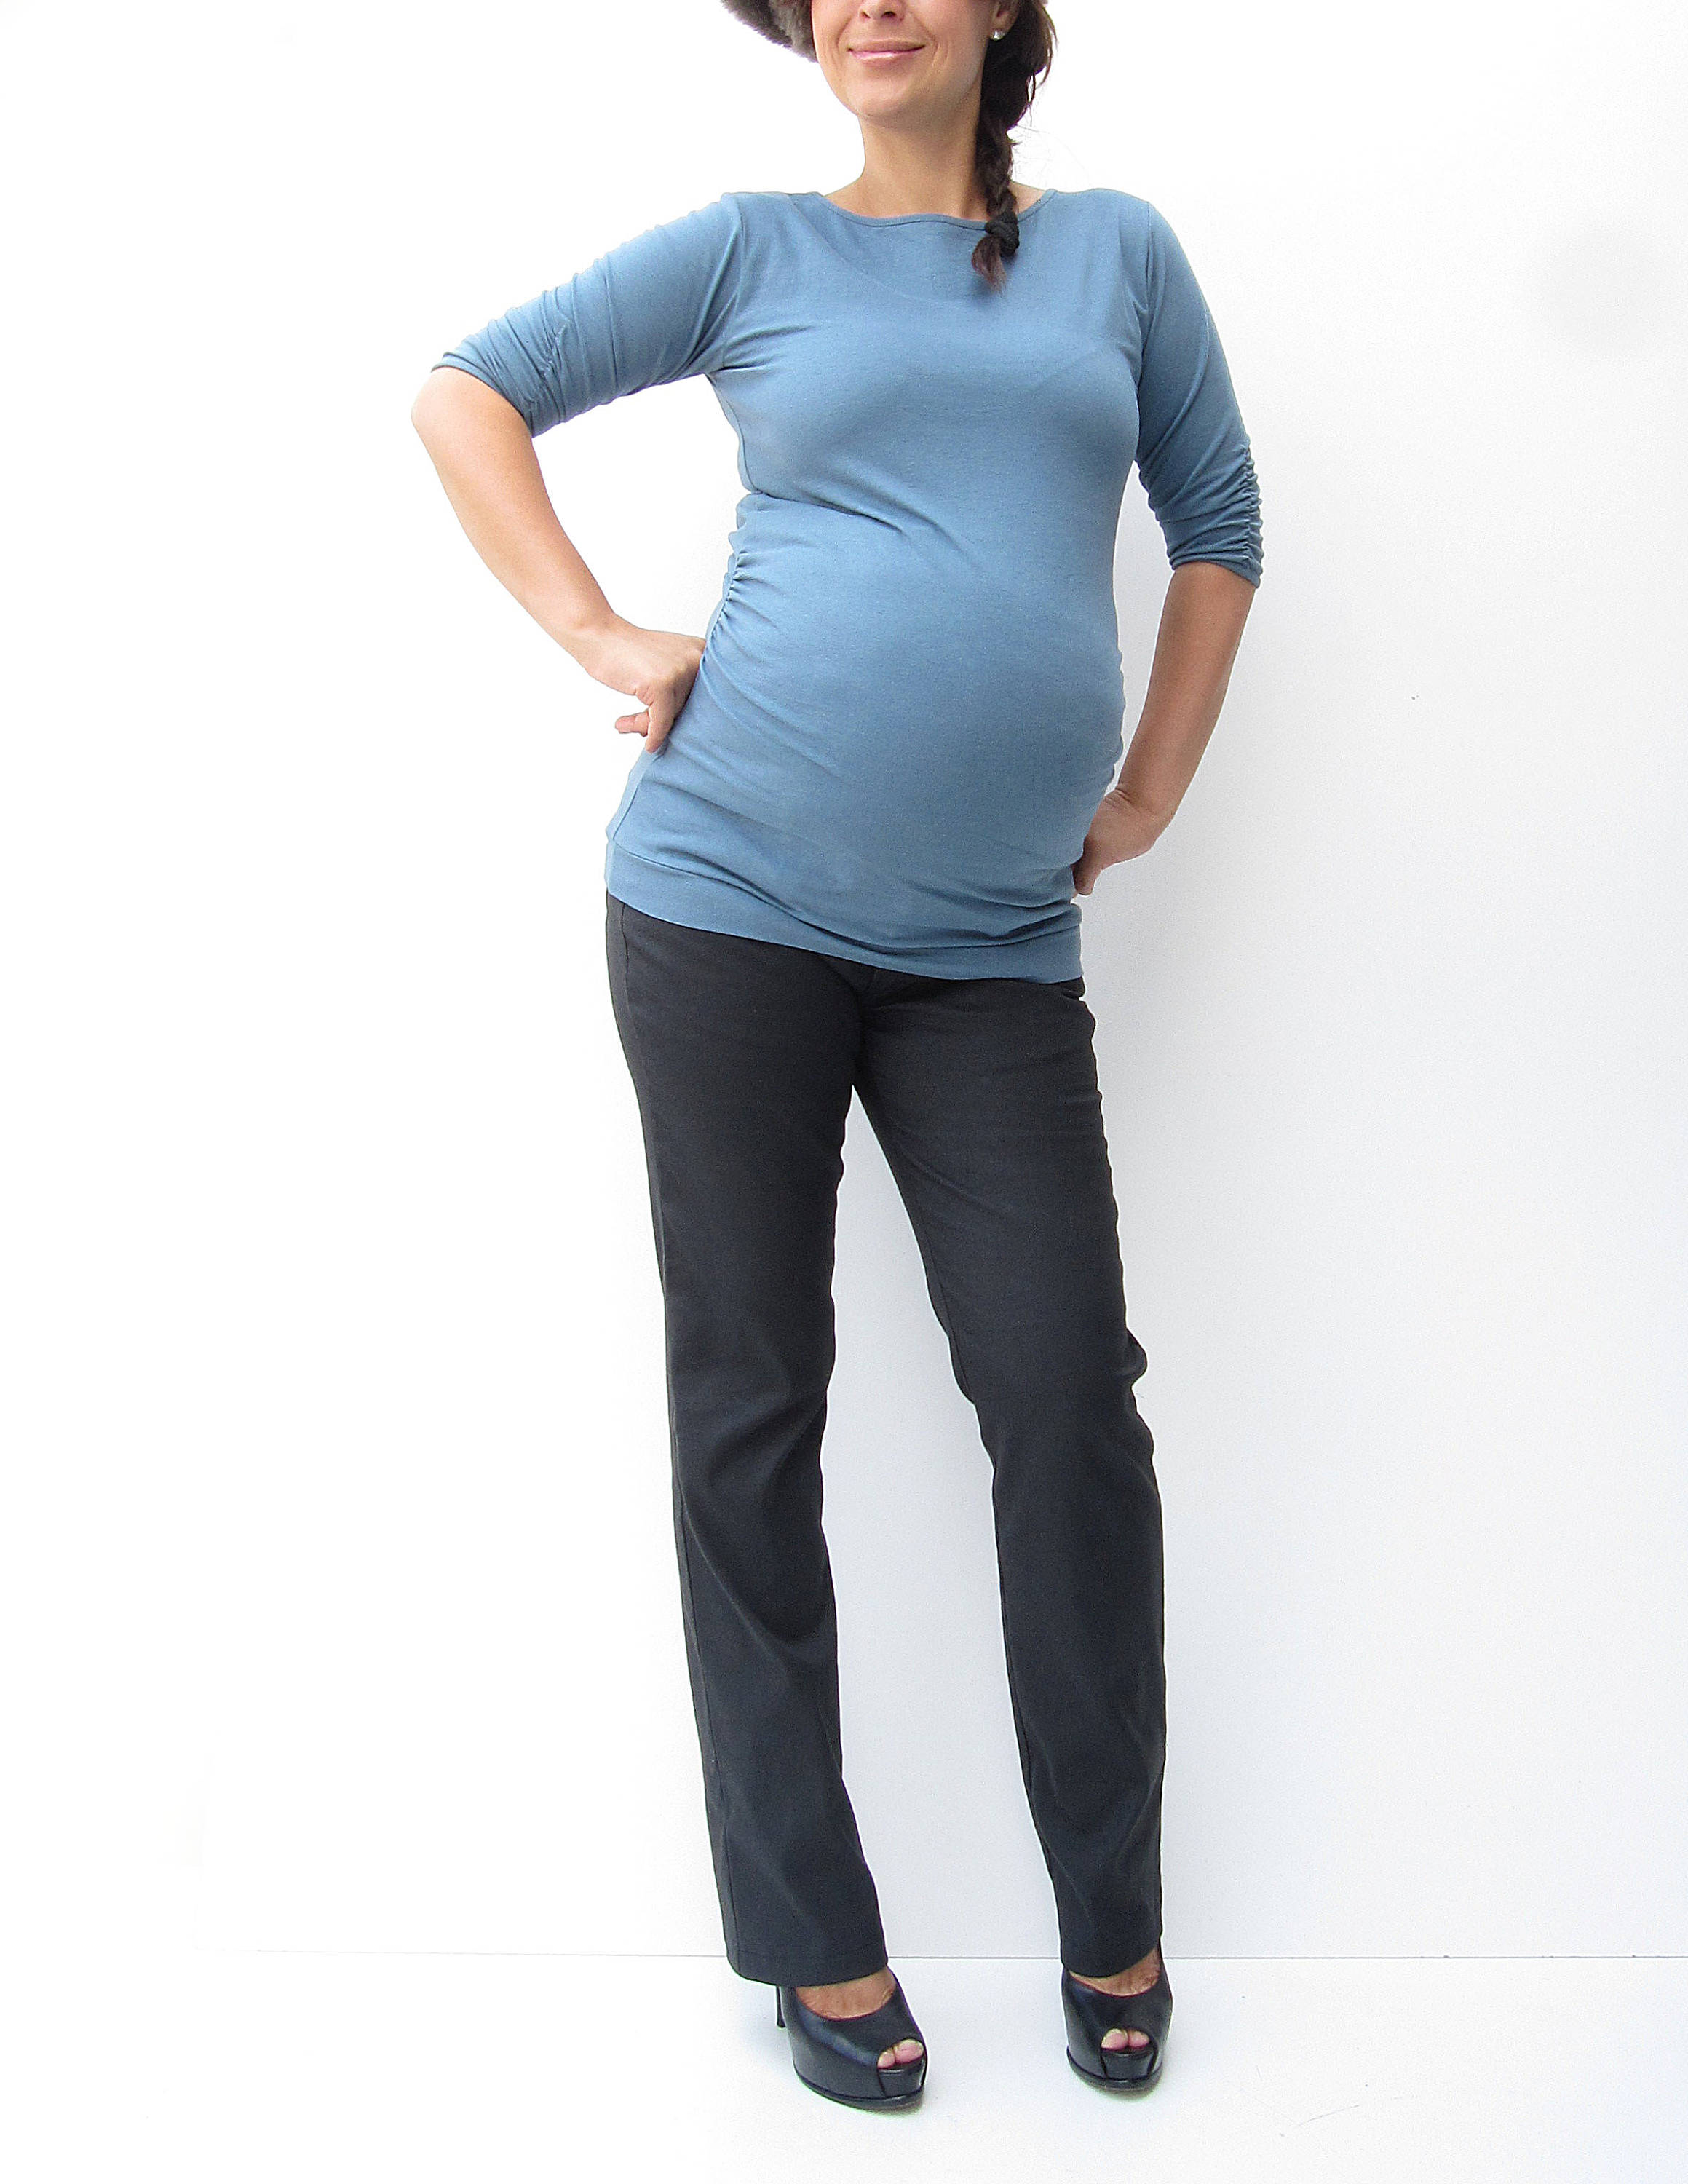 Maternity Office Black Pants Maternity Trousers Expecting a